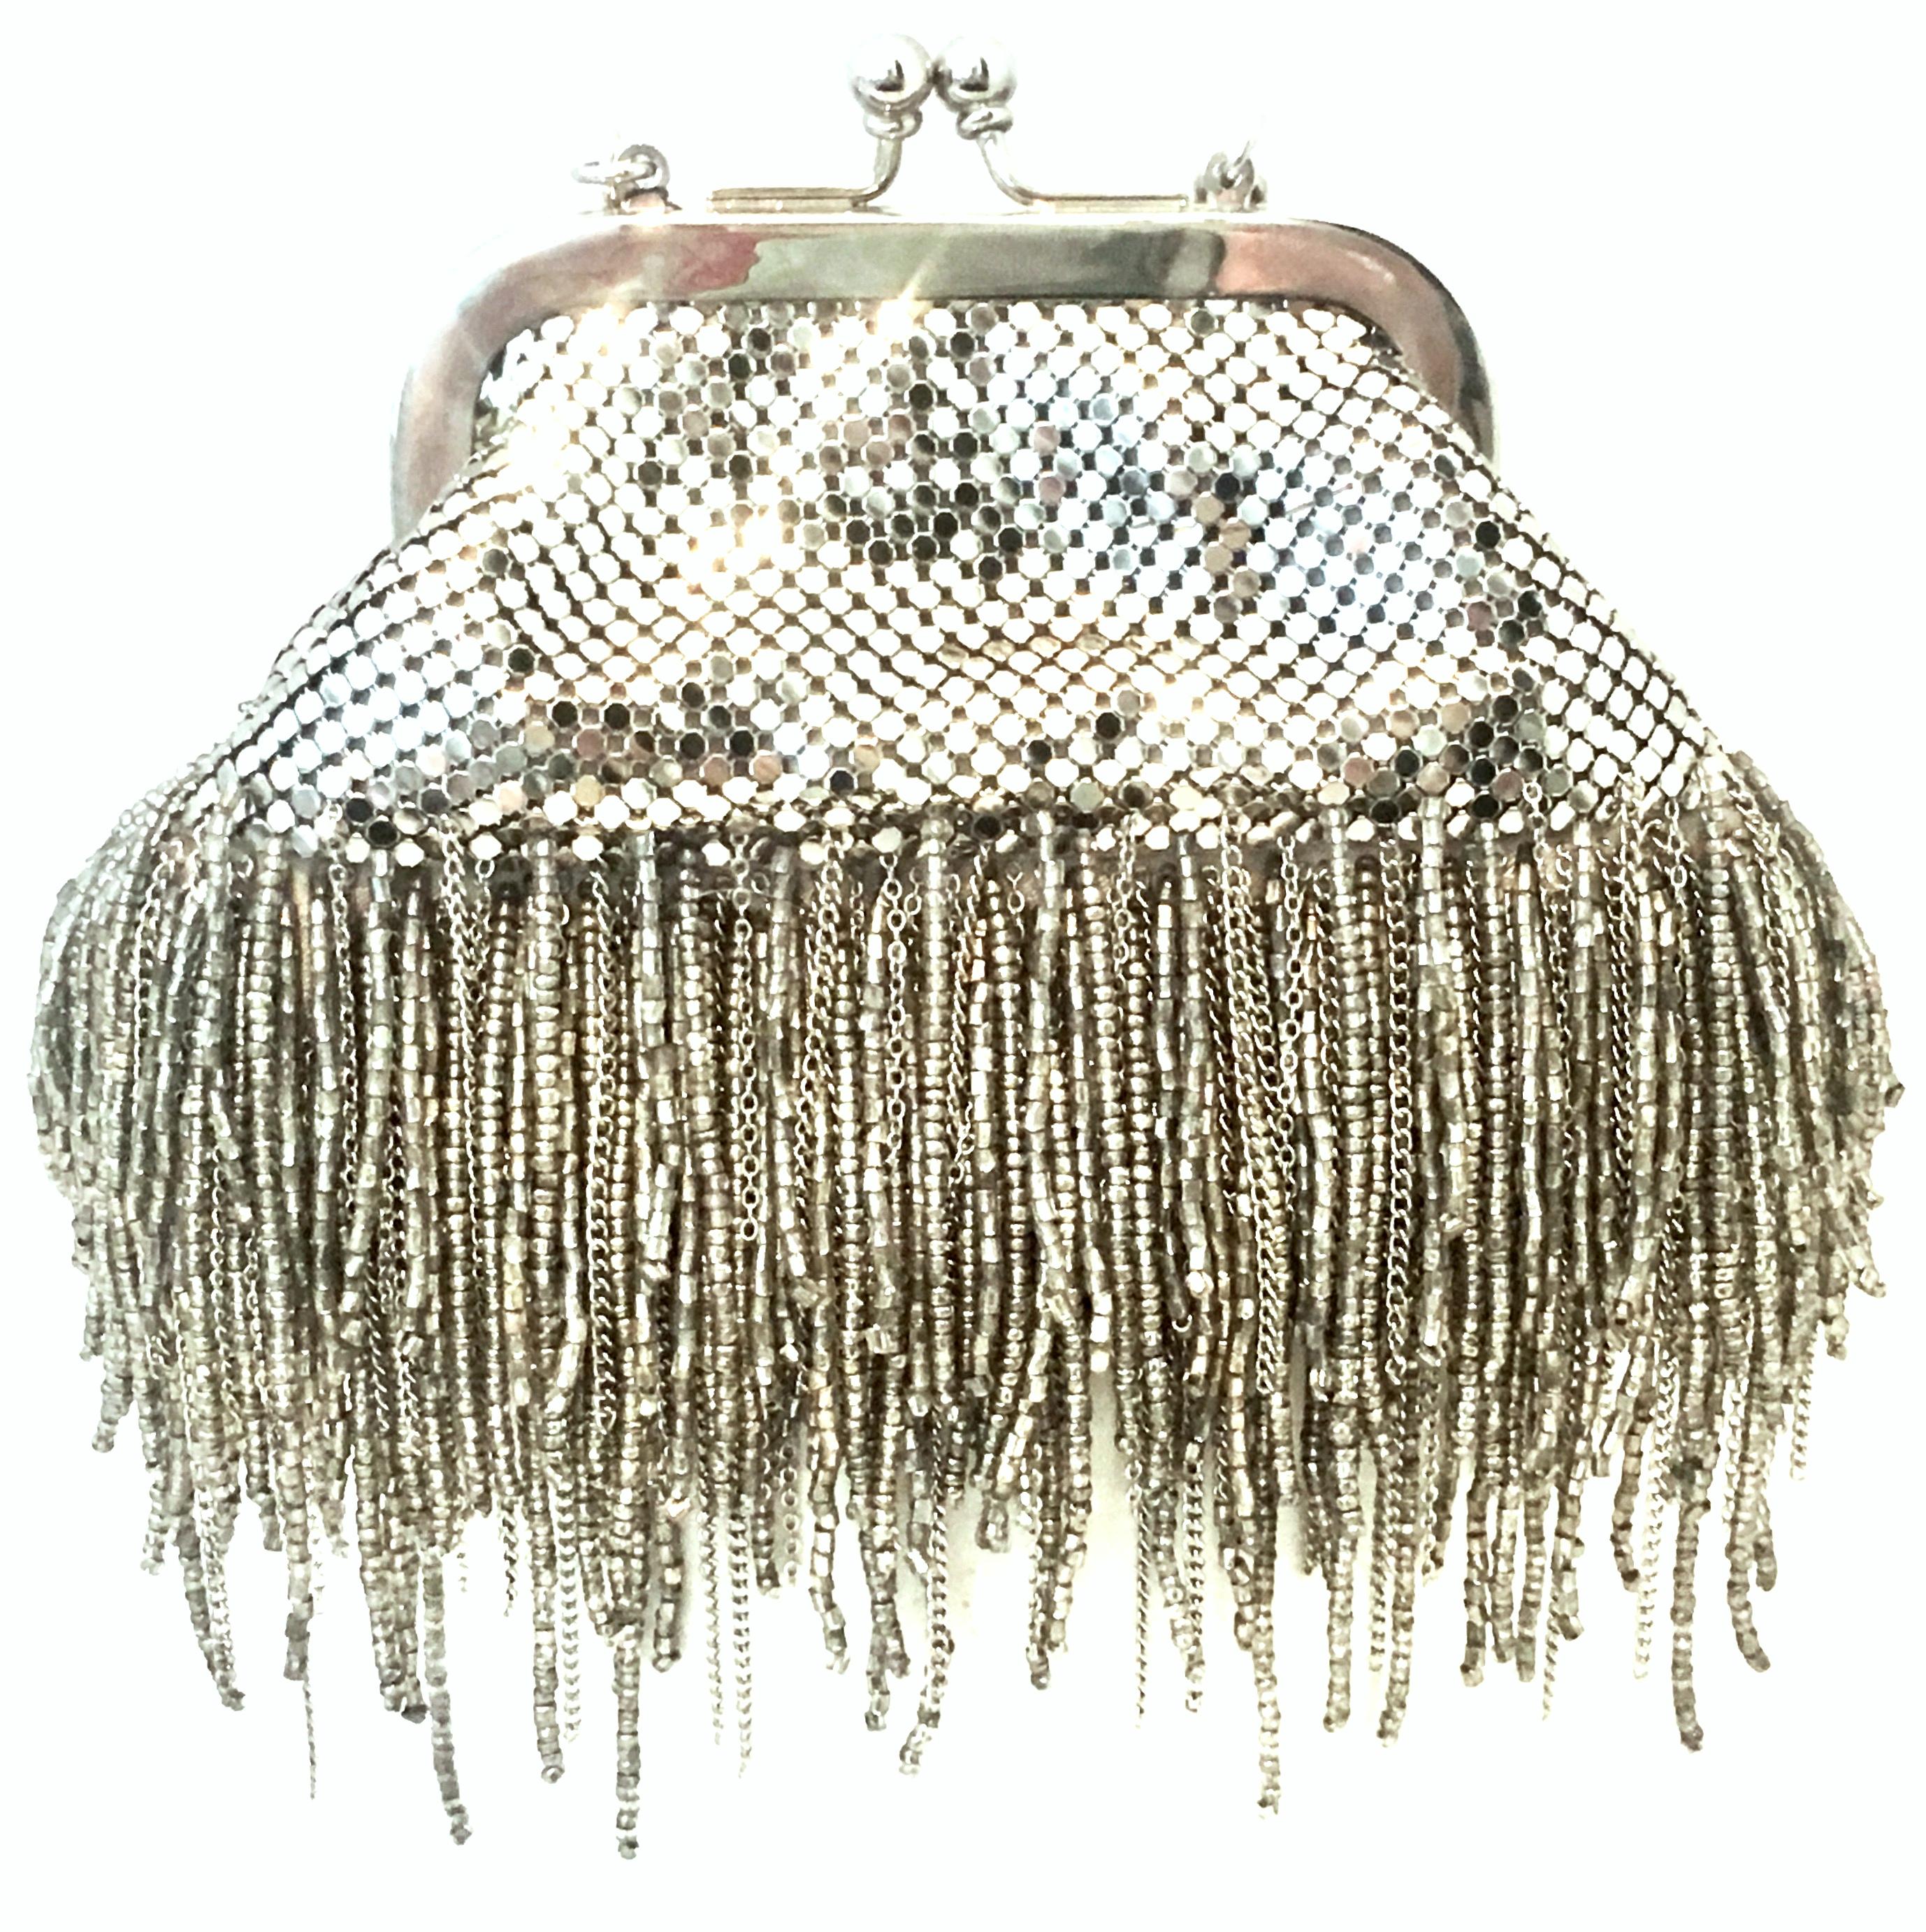 21st Century Silver Metal Mesh & Beaded Fringe Evening Bag By, Whiting & Davis. This new silver plate metal mesh with cut steel beaded fringe evening bag maintains the original manufacture tag. This soft side multi purpose piece features the iconic